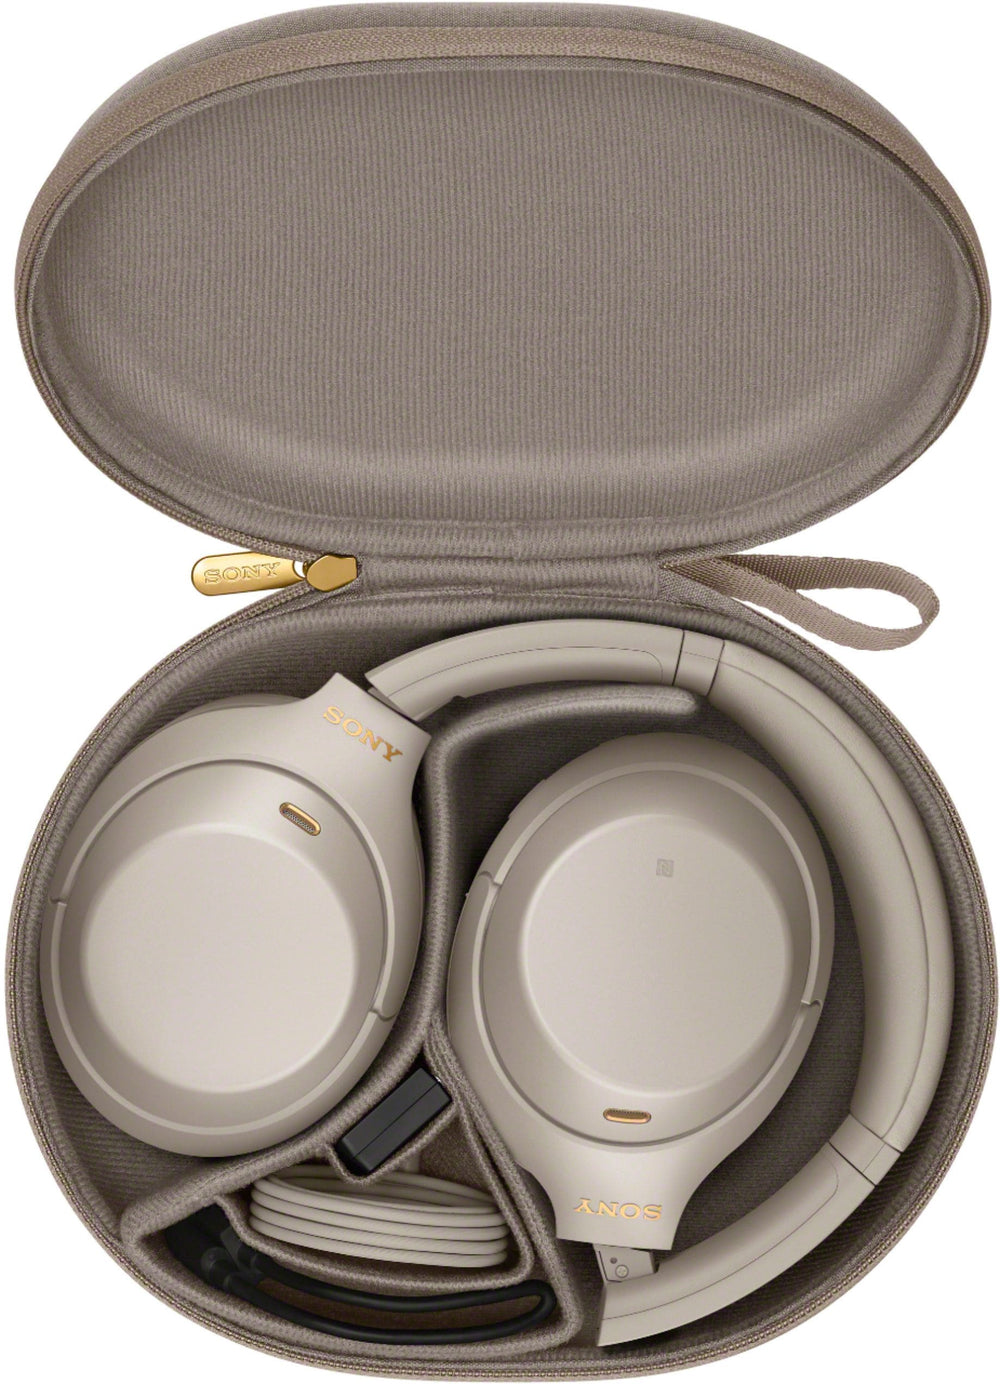 Sony - WH-1000XM4 Wireless Noise-Cancelling Over-the-Ear Headphones - Silver_1